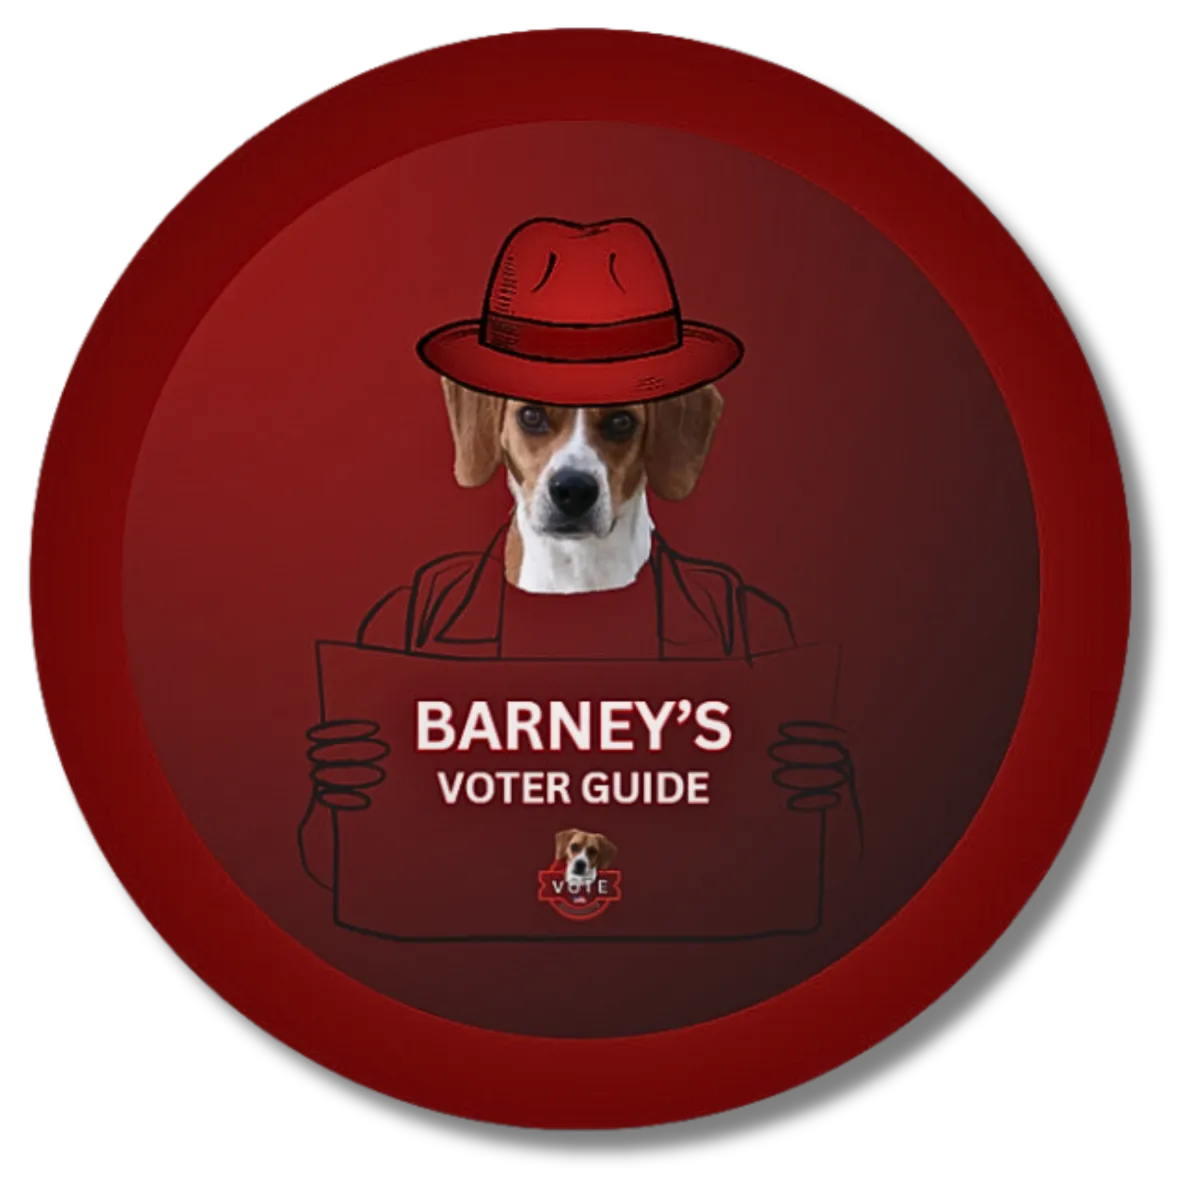 BARNEY LOGO_VOTER GUIDES_VOTE GRASSROOTS